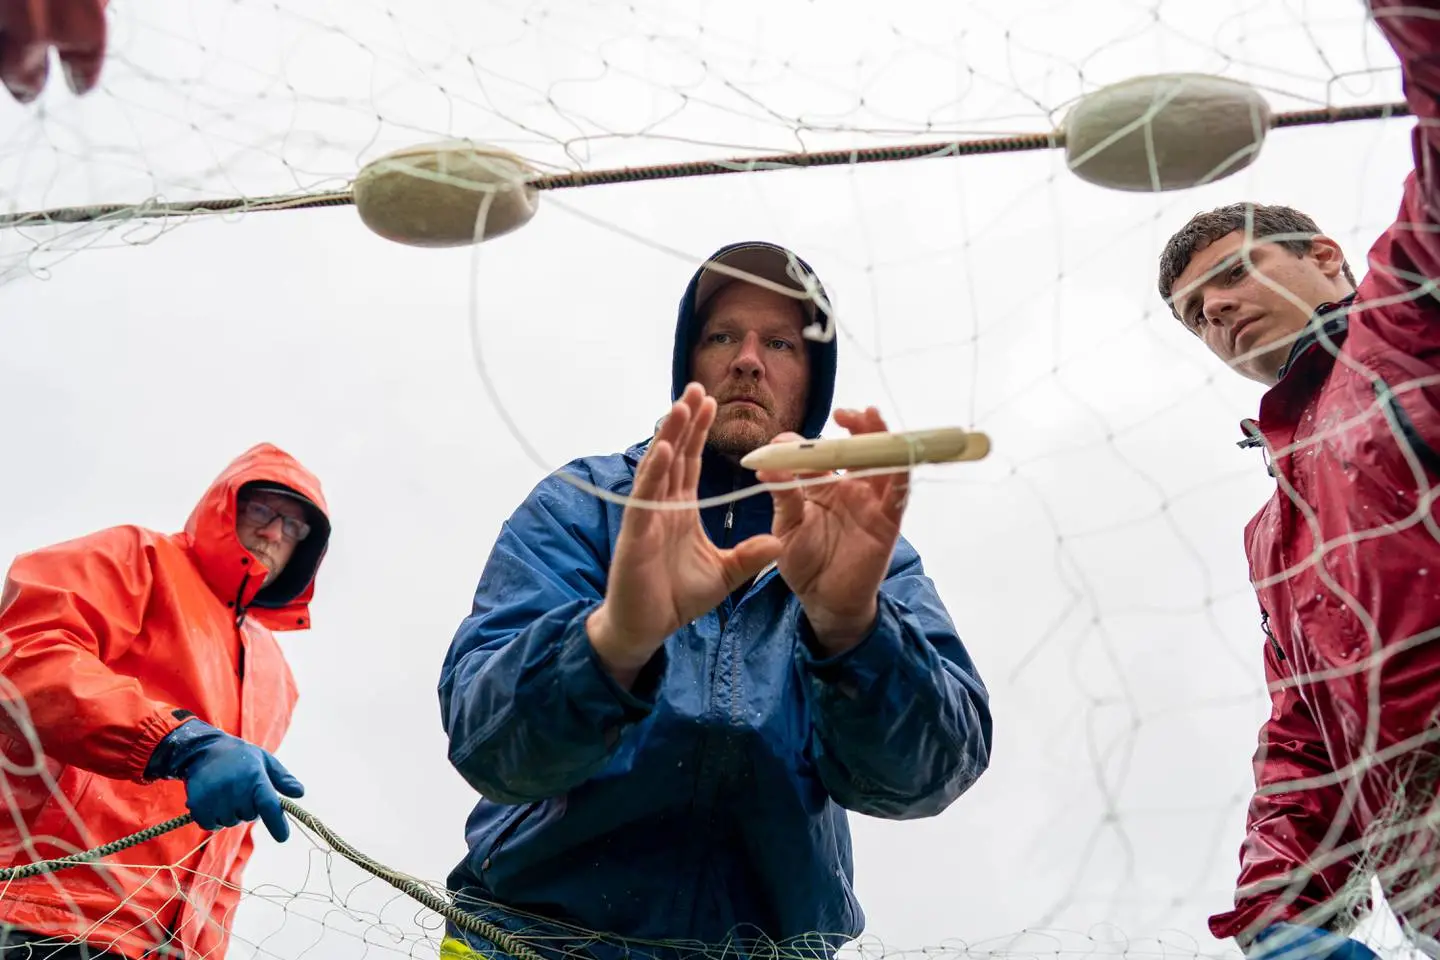 Two fishermen hold a net in place while a third uses a wooden spindle to weave parts of the net together.